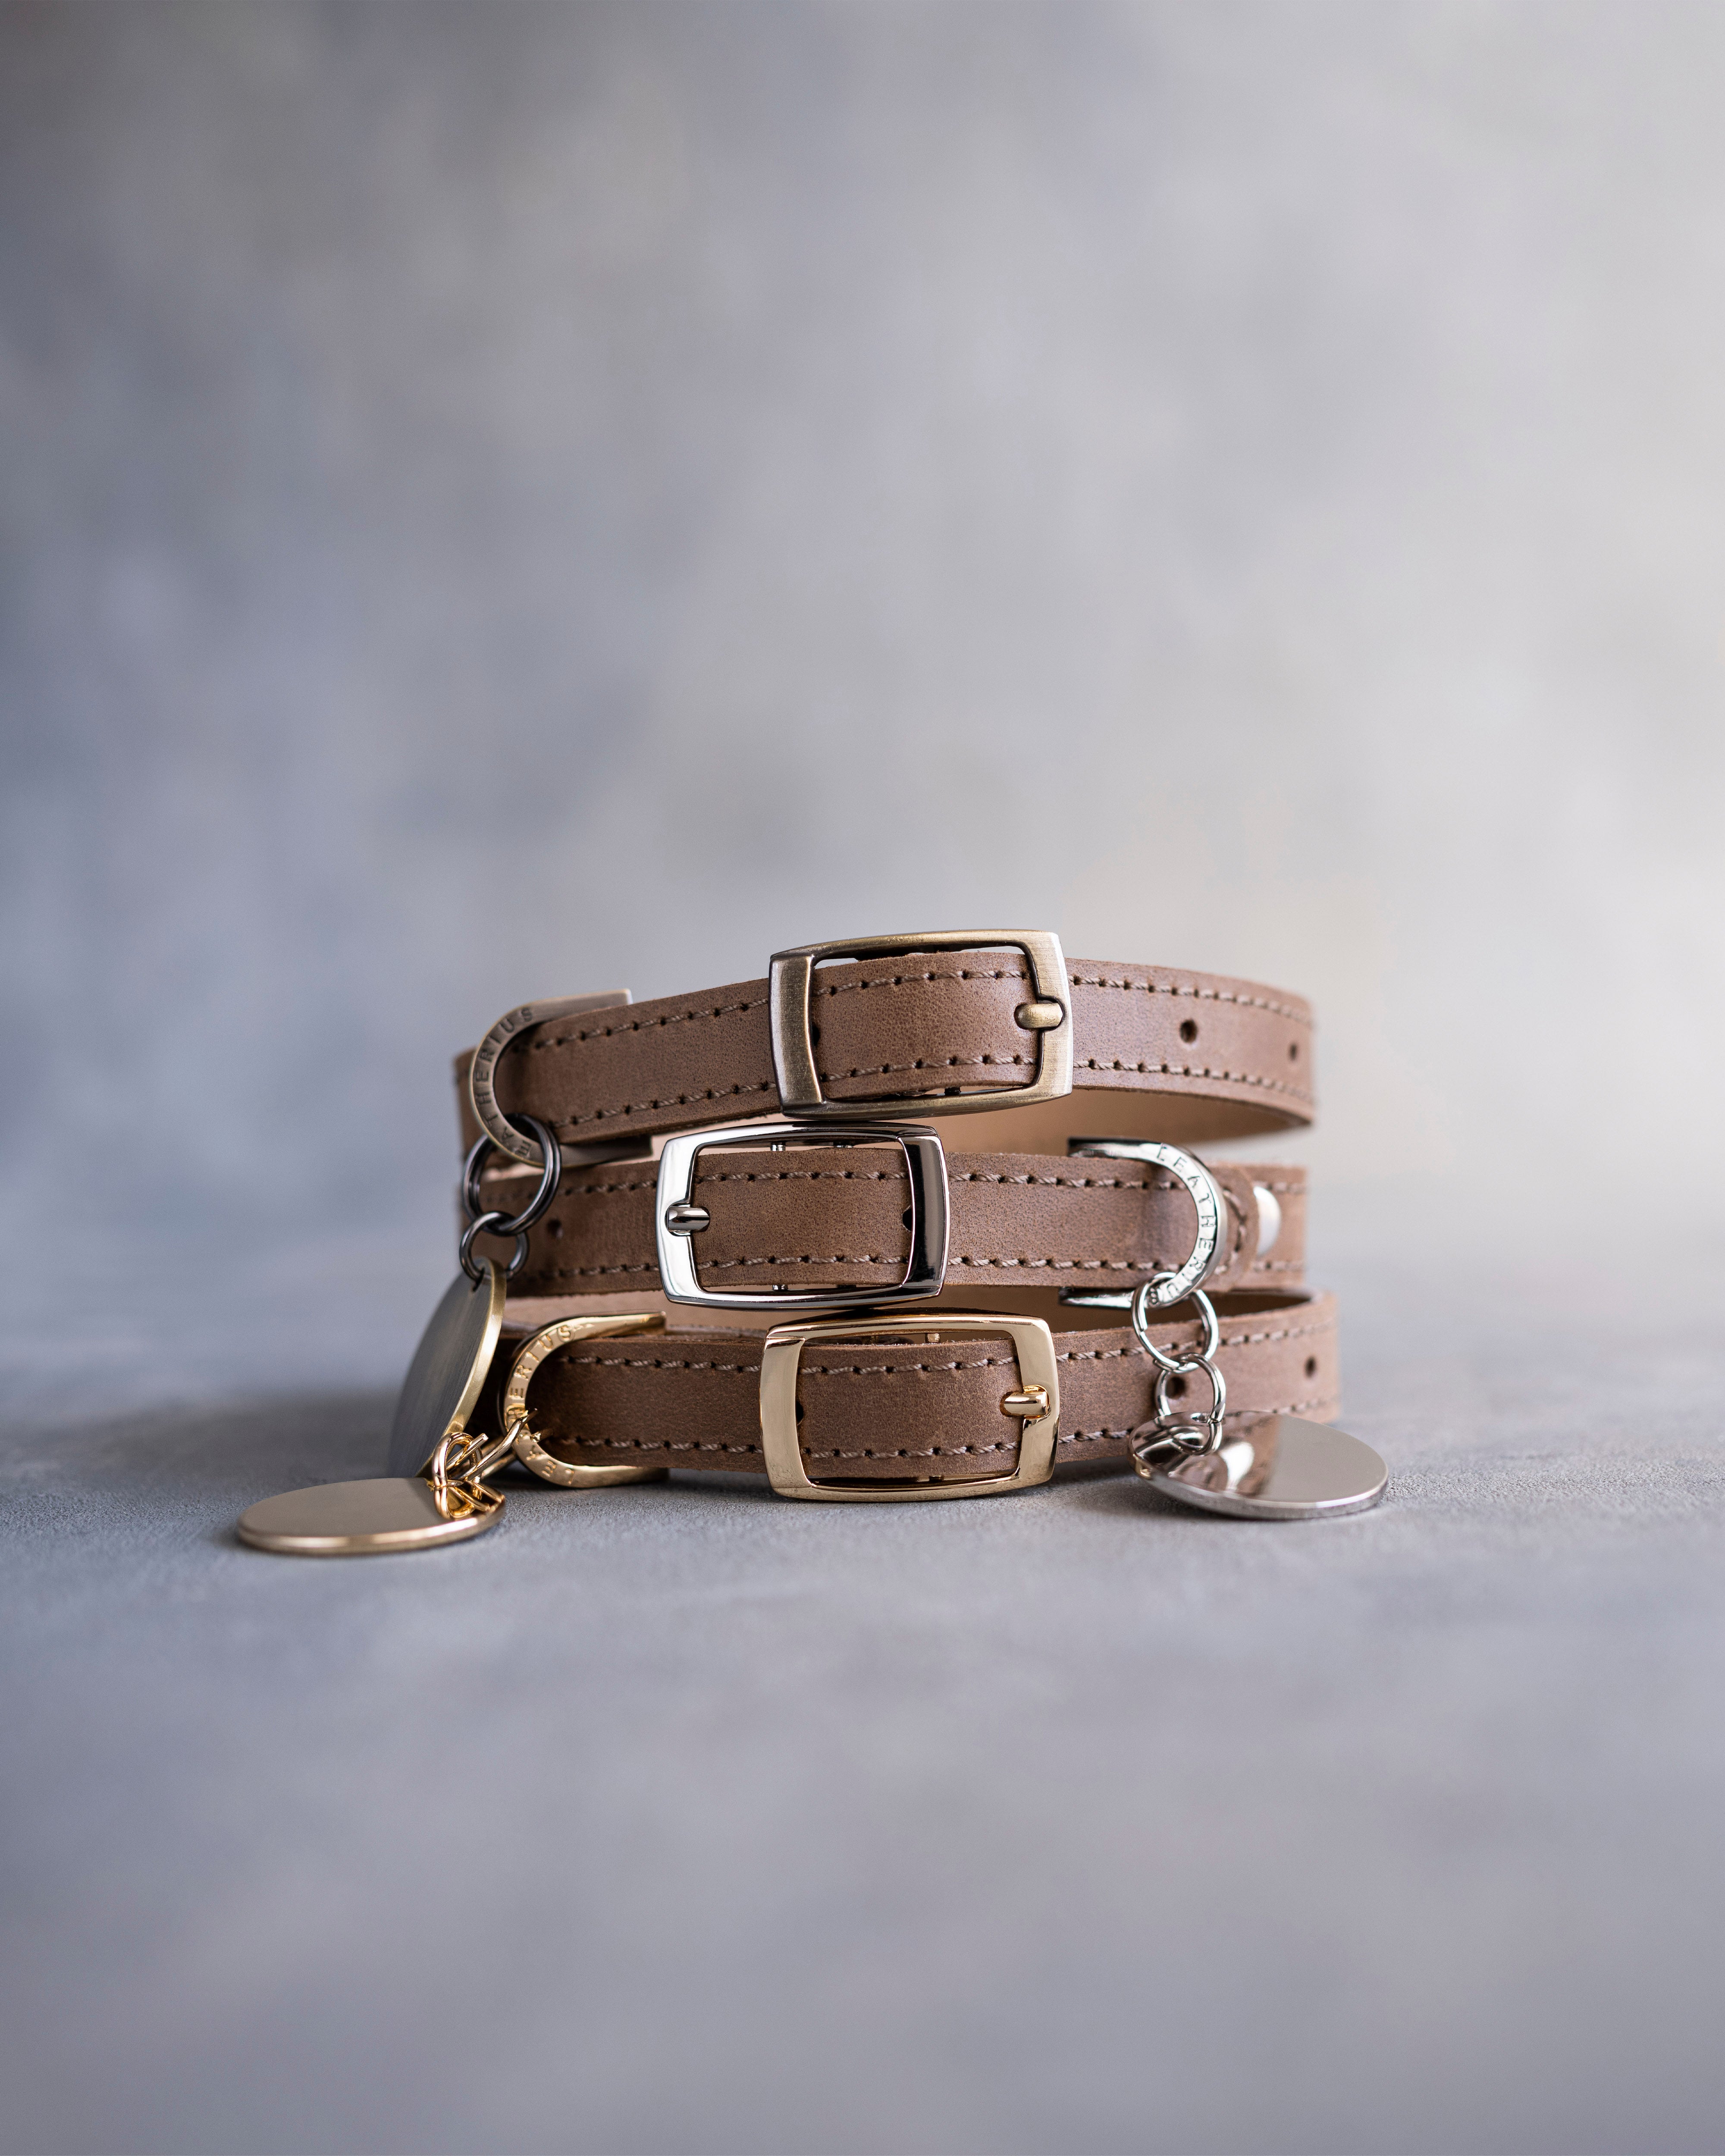 Dog Collar in Sicilian Brown leather with classy pin buckle